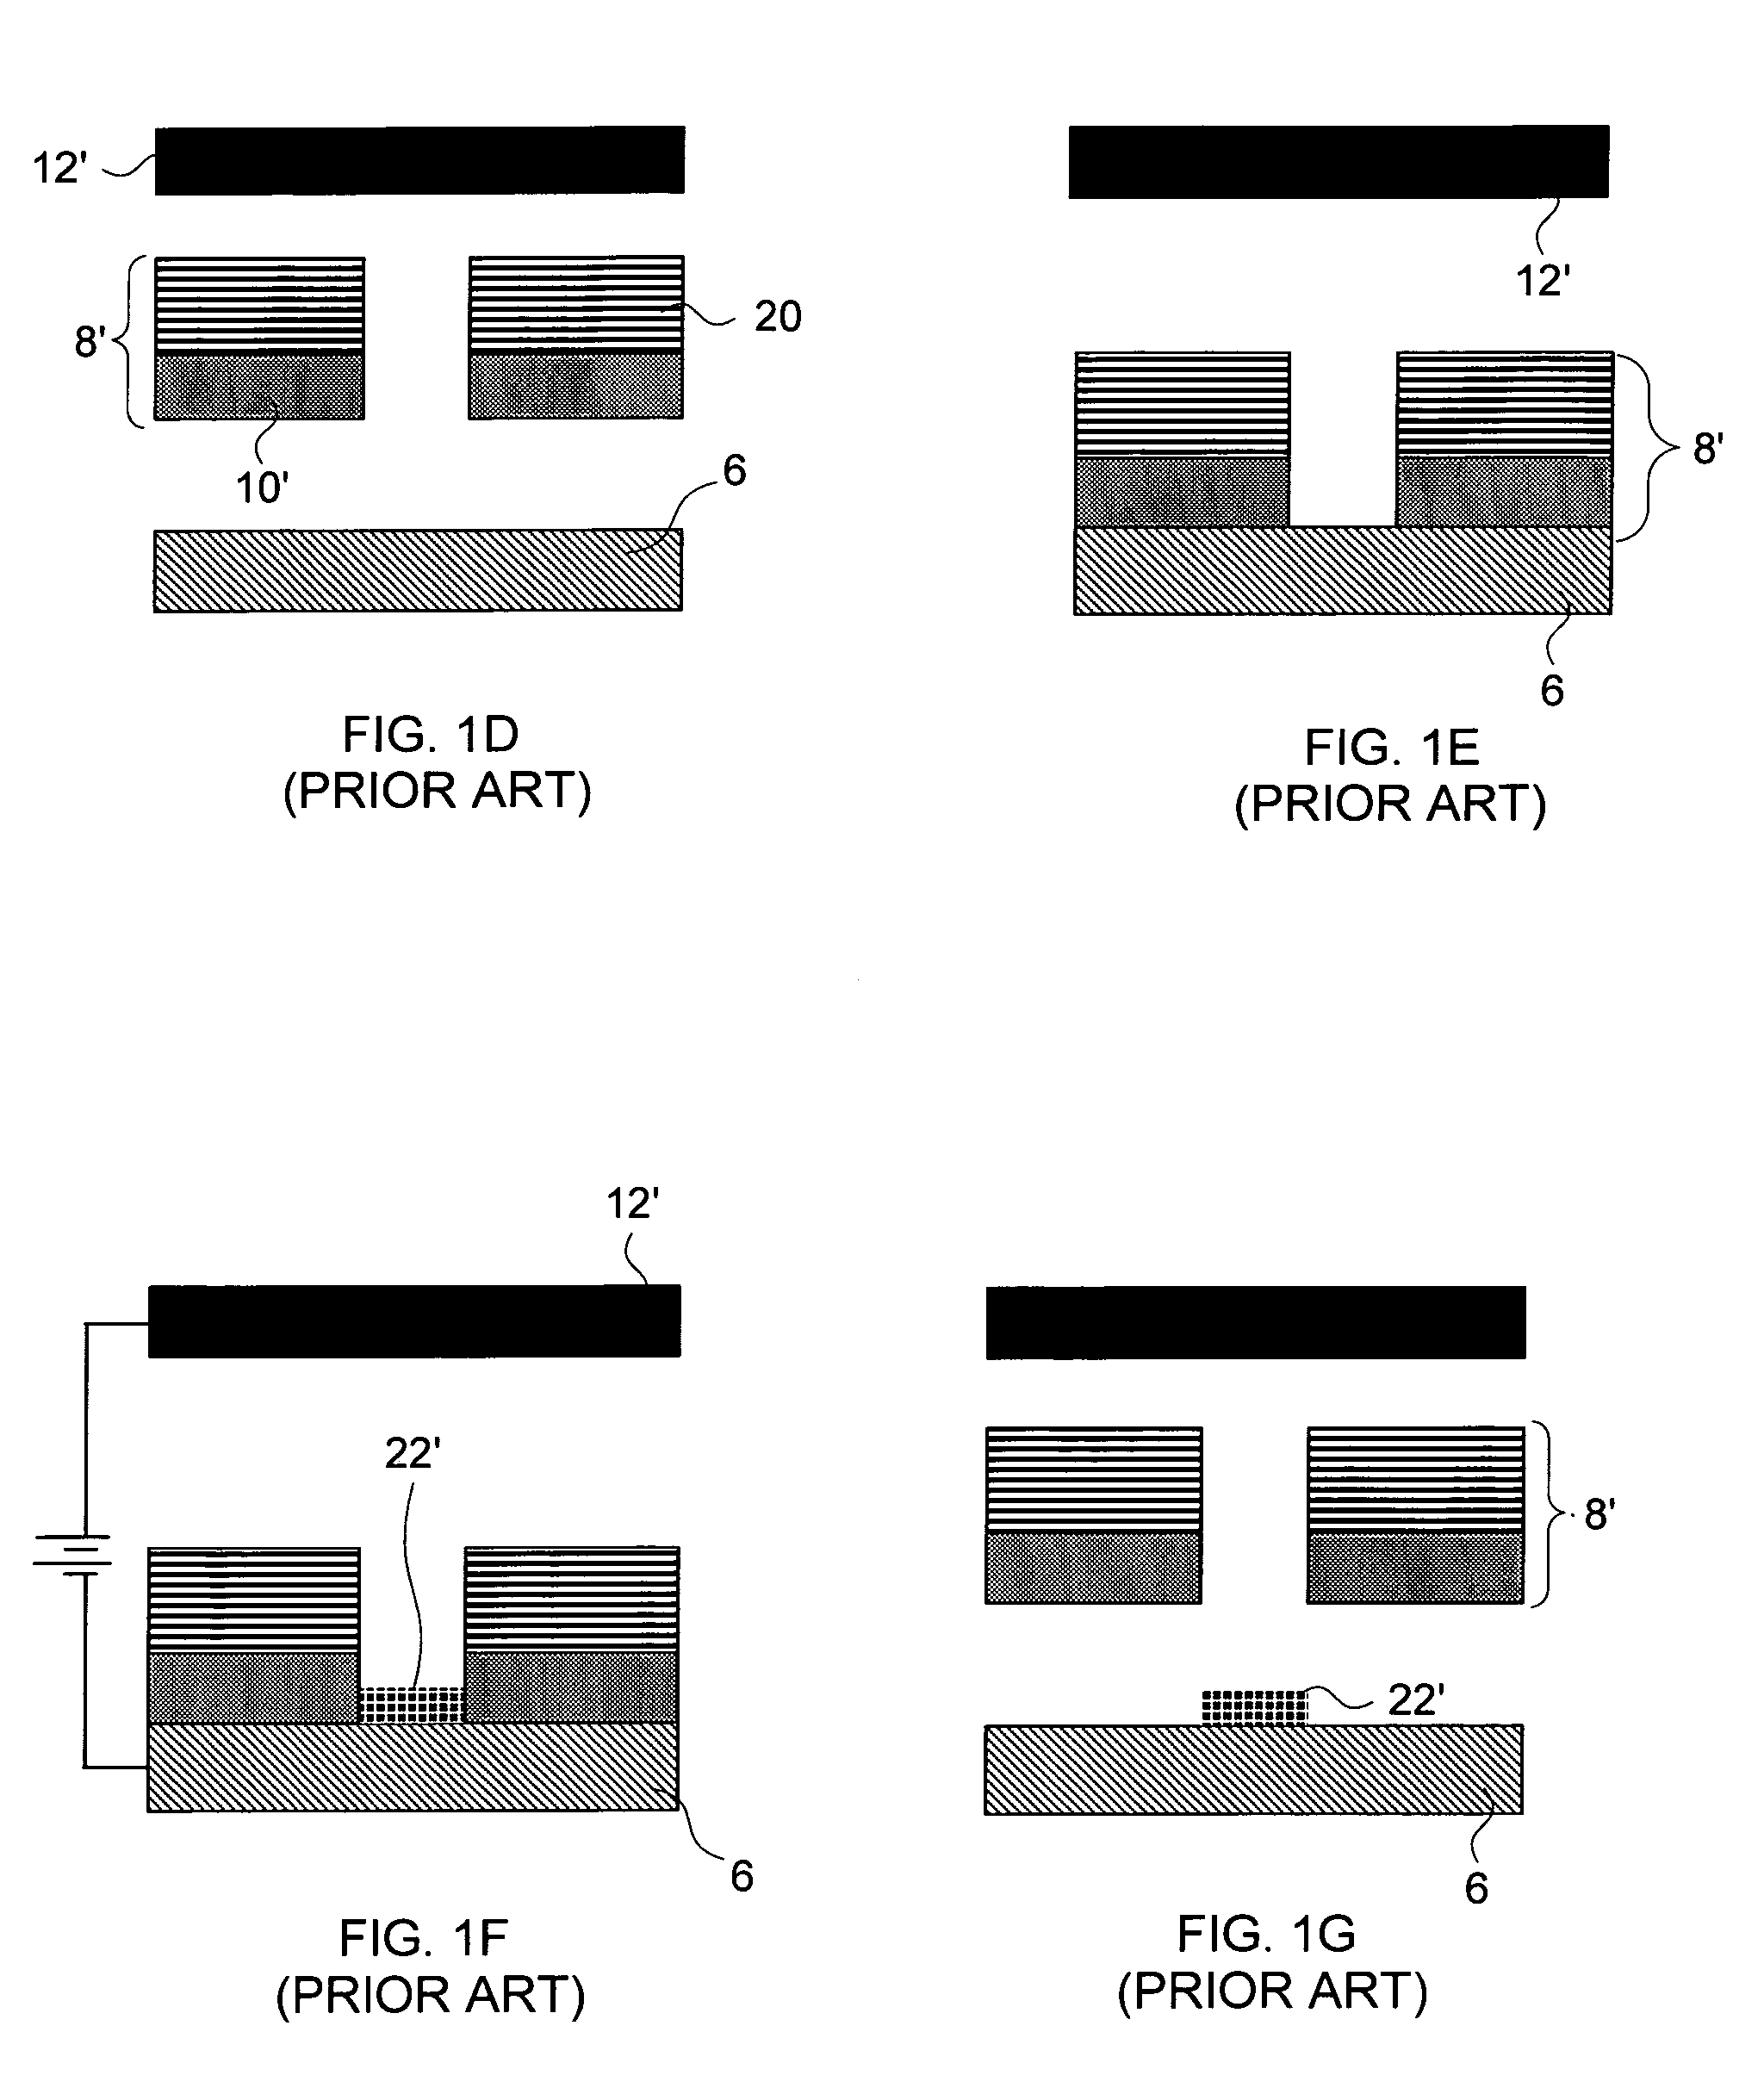 Multi-cell masks and methods and apparatus for using such masks to form three-dimensional structures